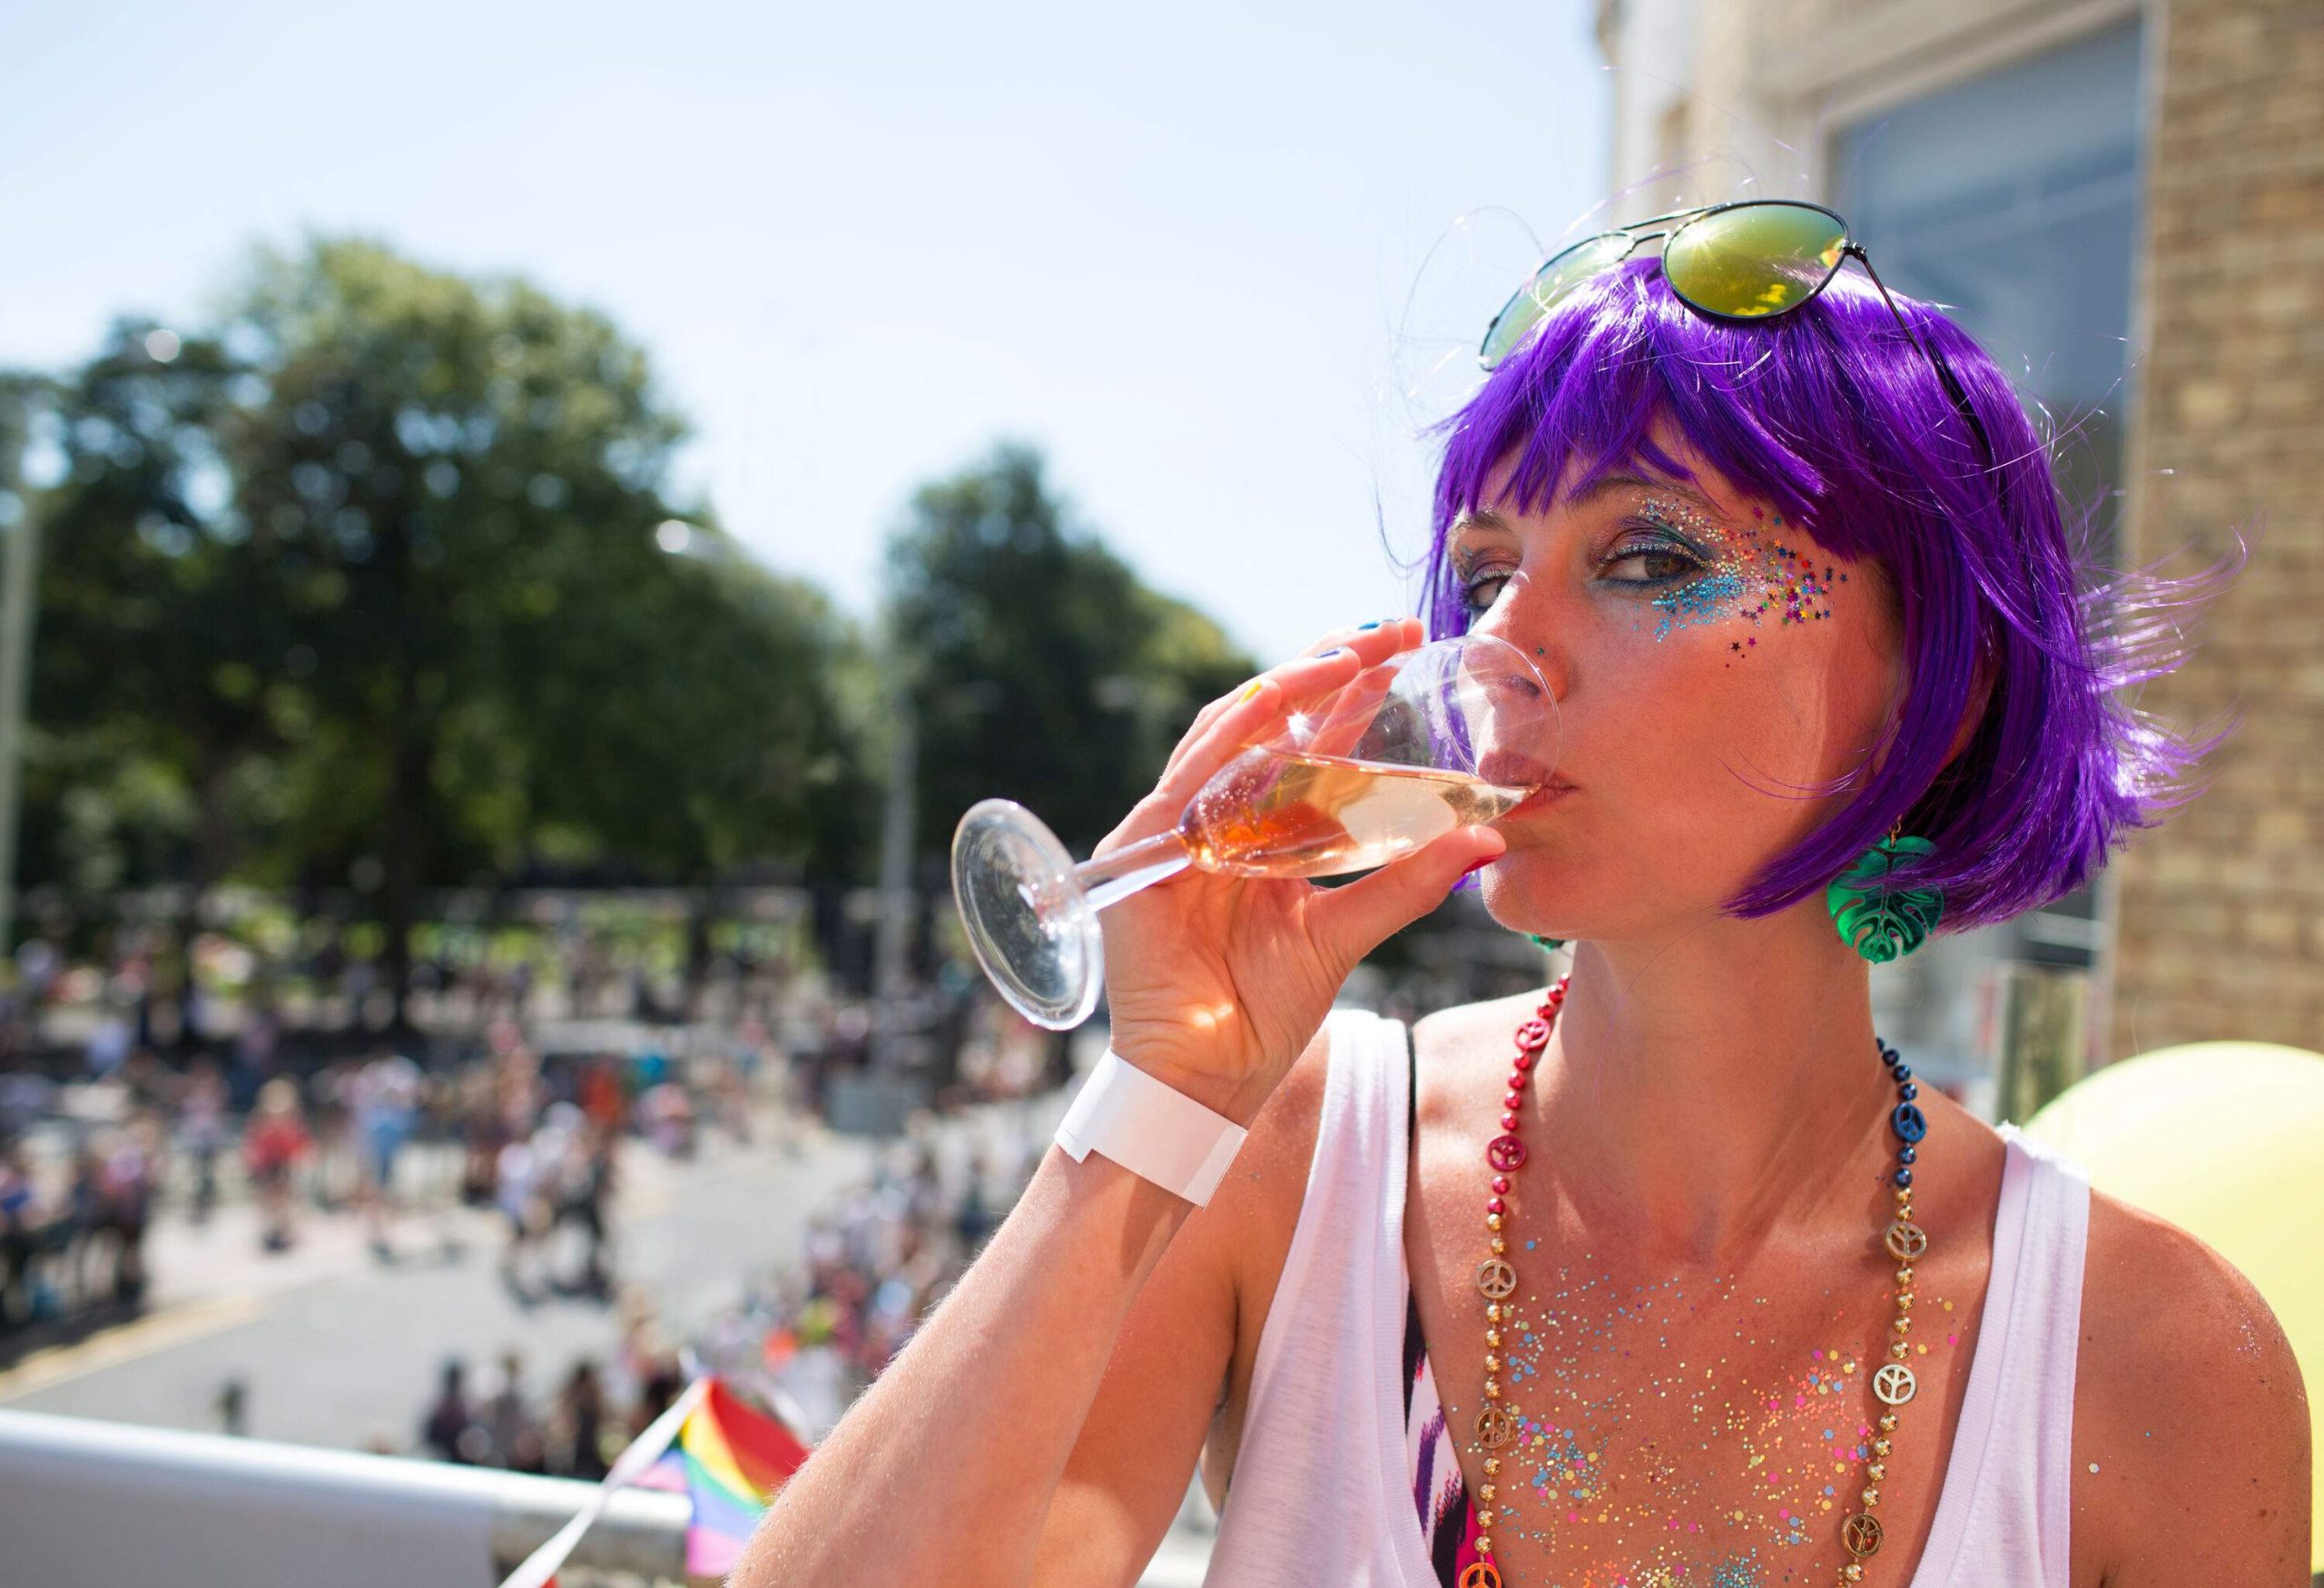 A young woman wearing a purple wig and sunglasses sipping champagne outdoors on a sunny day.